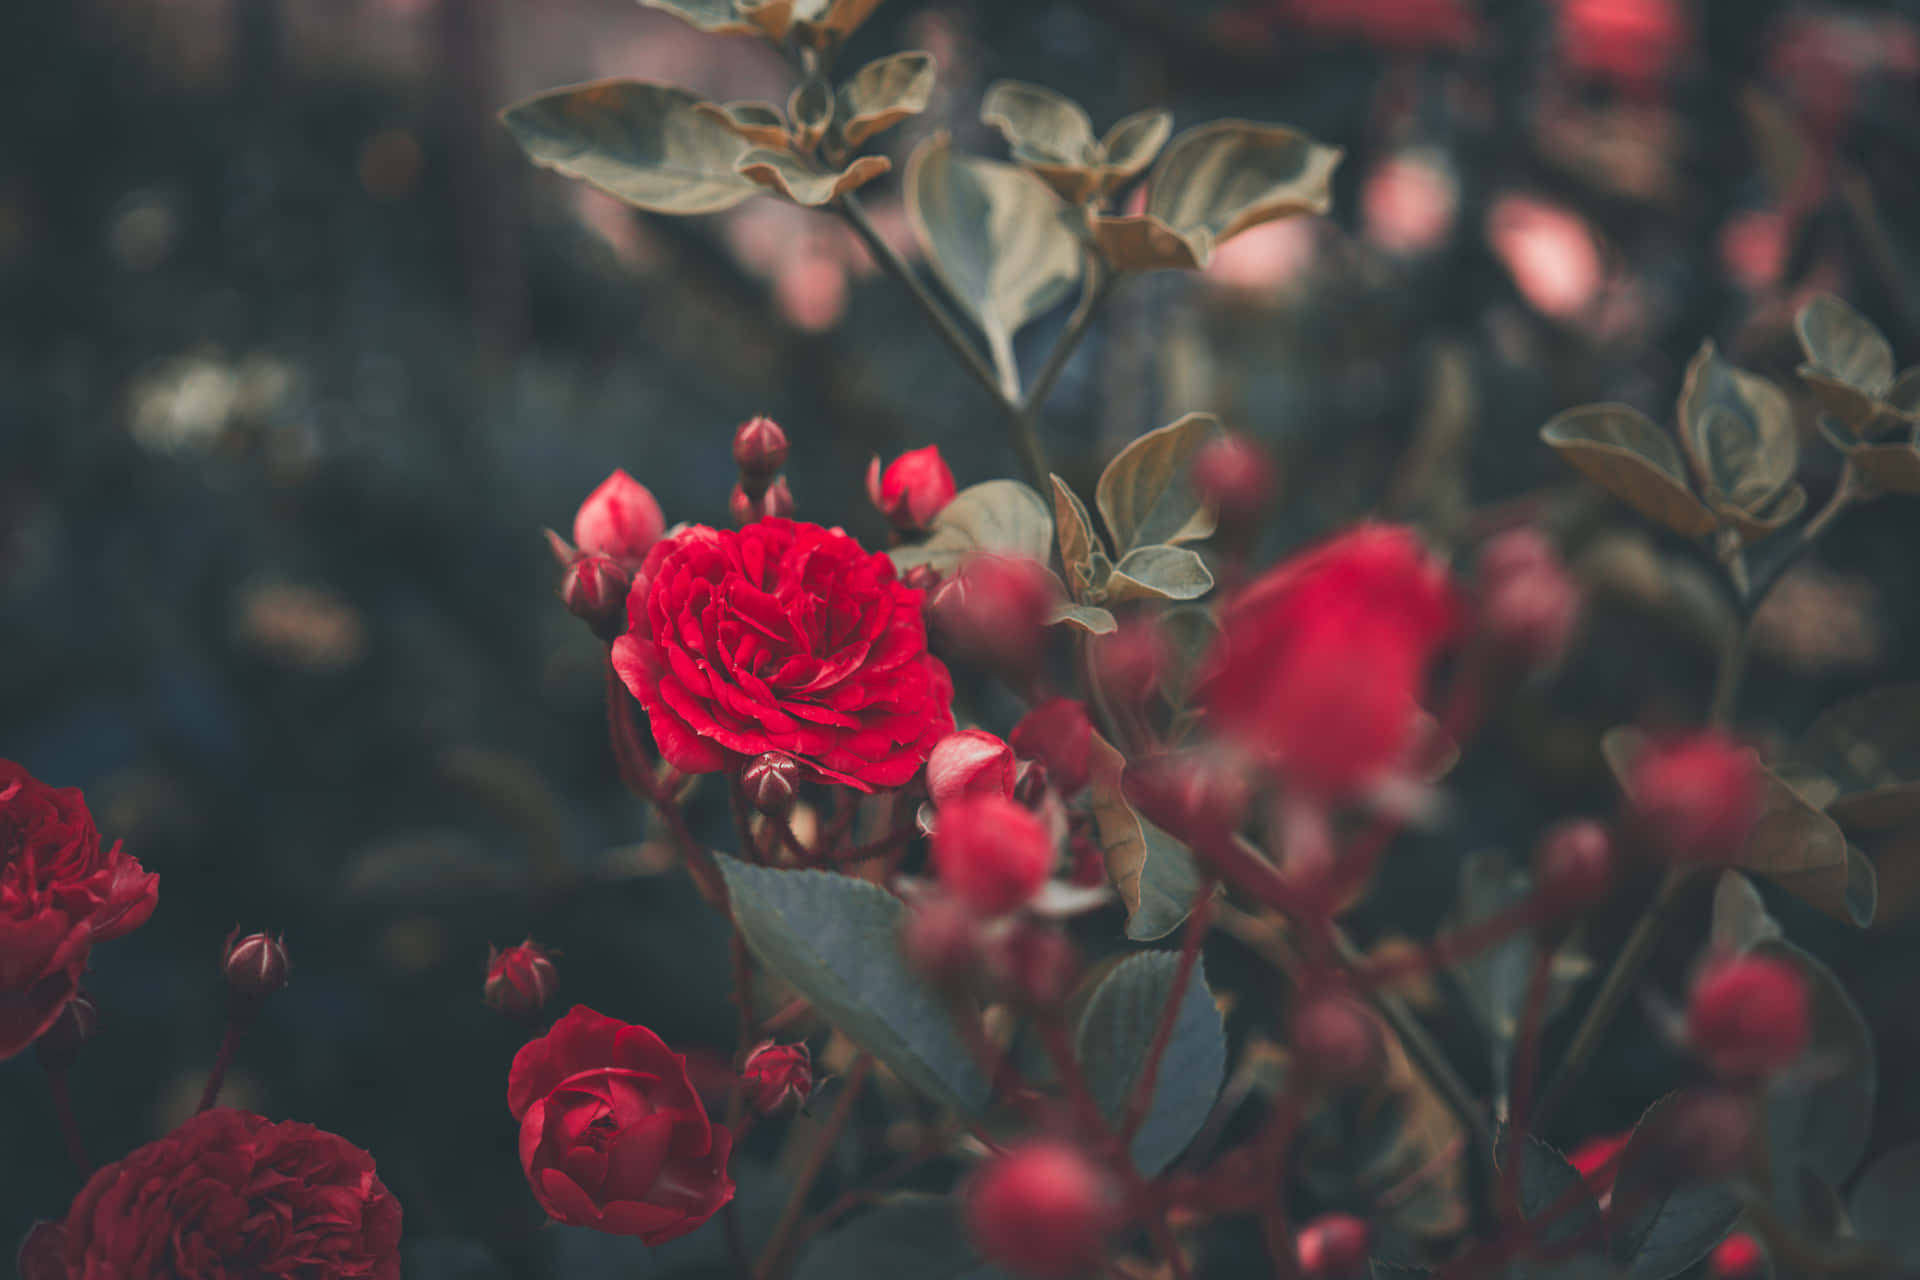 Red Roses Background Wallpaper